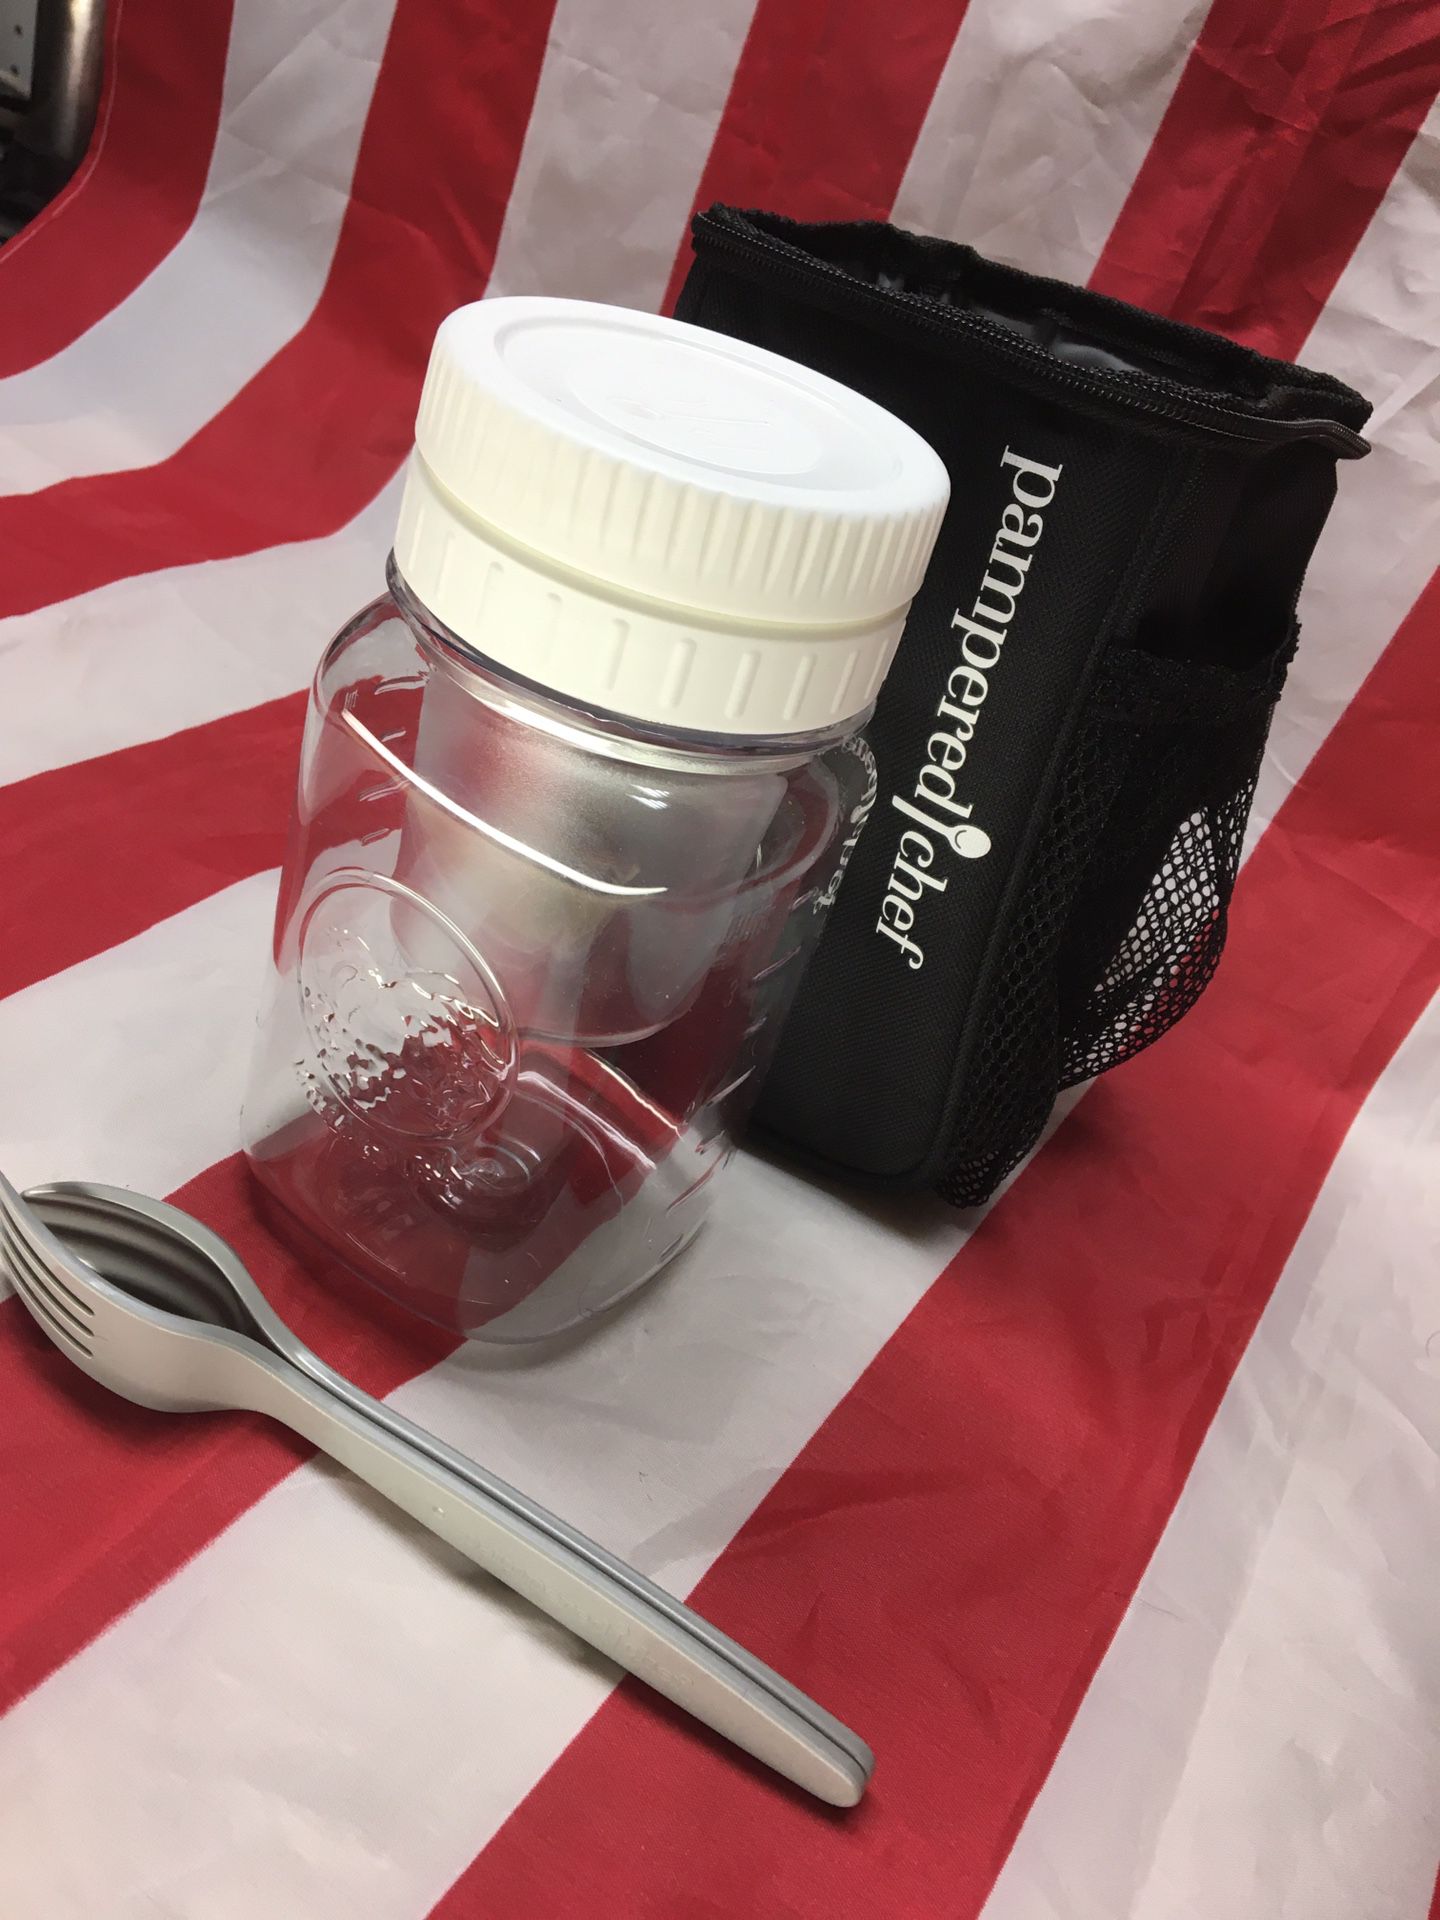 Pampered Chef lunch tote